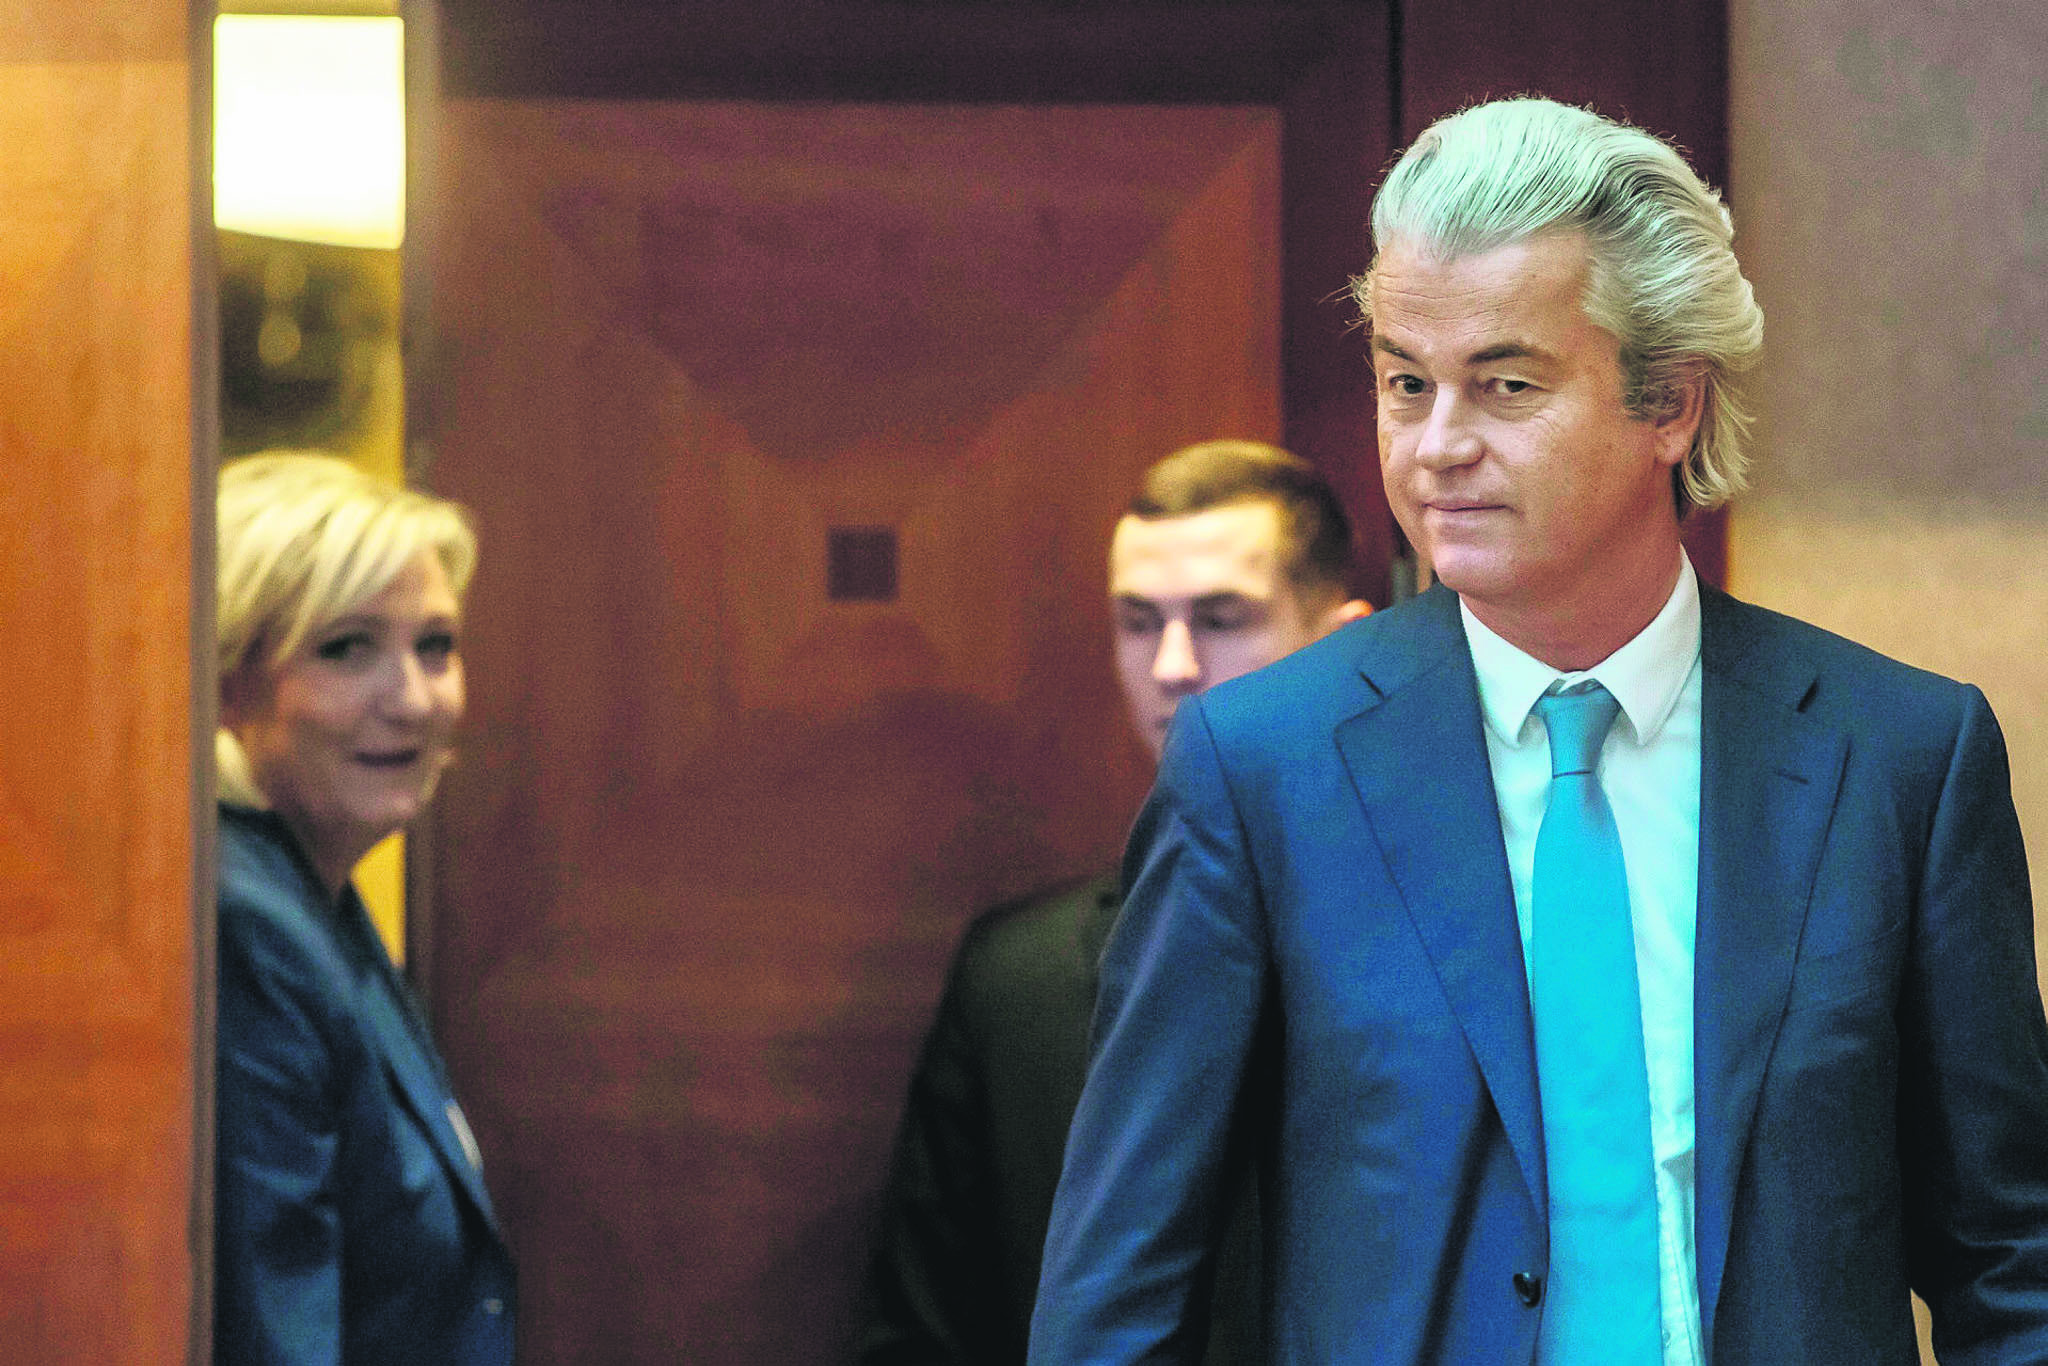 Marine Le Pen (L), head of French far-right National Front (FN) party and Dutch far-right politician Geert Wilders (R) of the PVV party arrive for a press conference in Prague, Dec. 16, 2017.